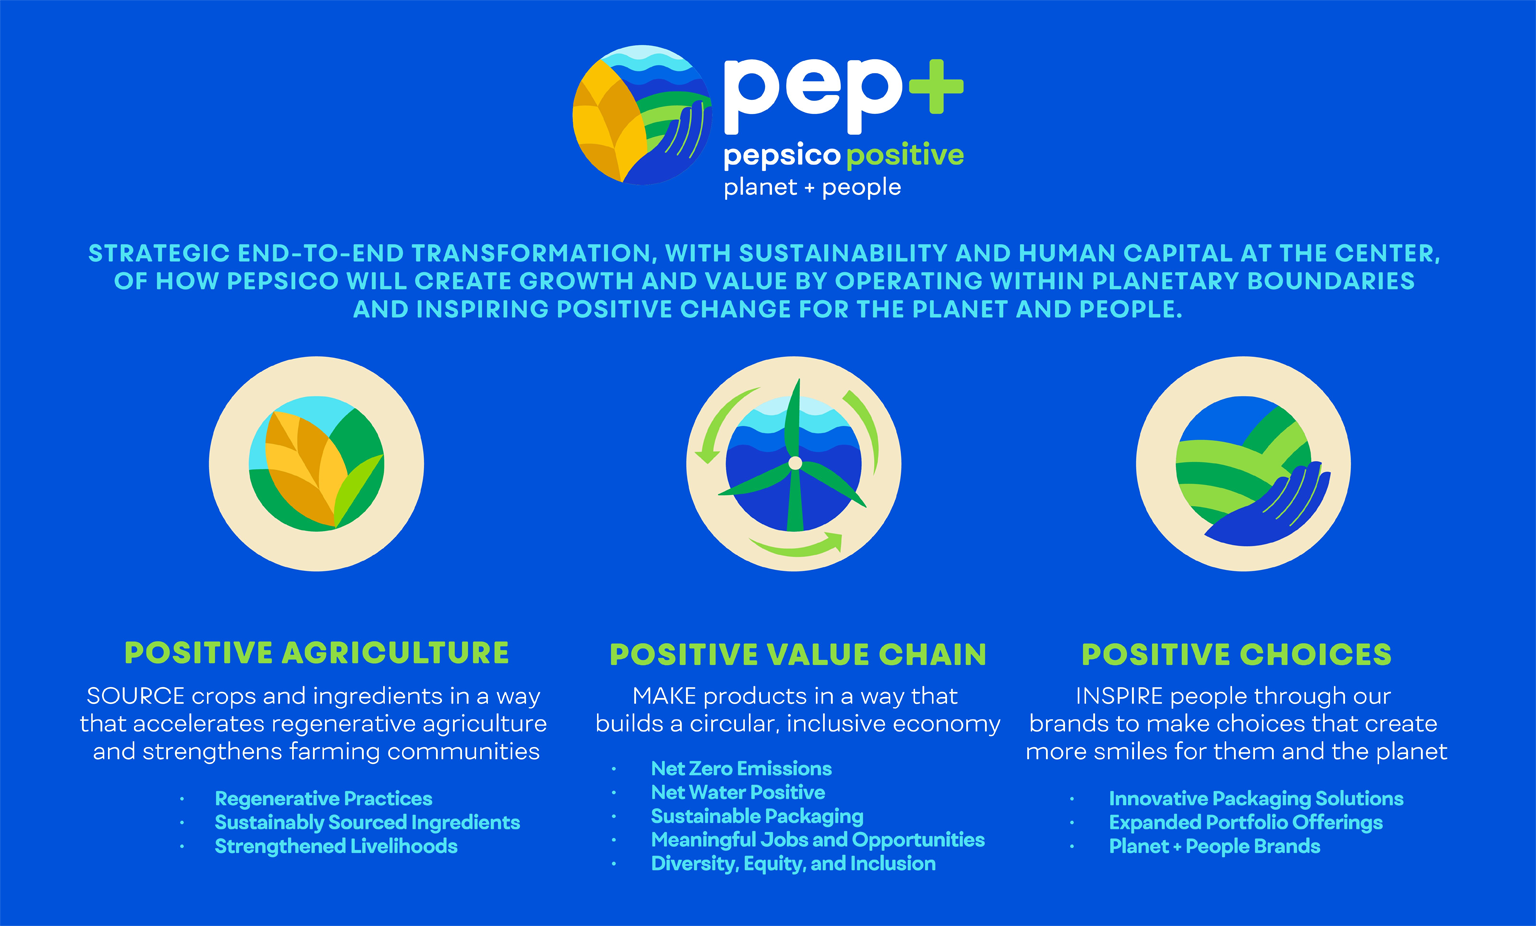 Infographic summary of the pep+ pillars: Positive Agriculture, Positive Value Chain, and Positive Choices.